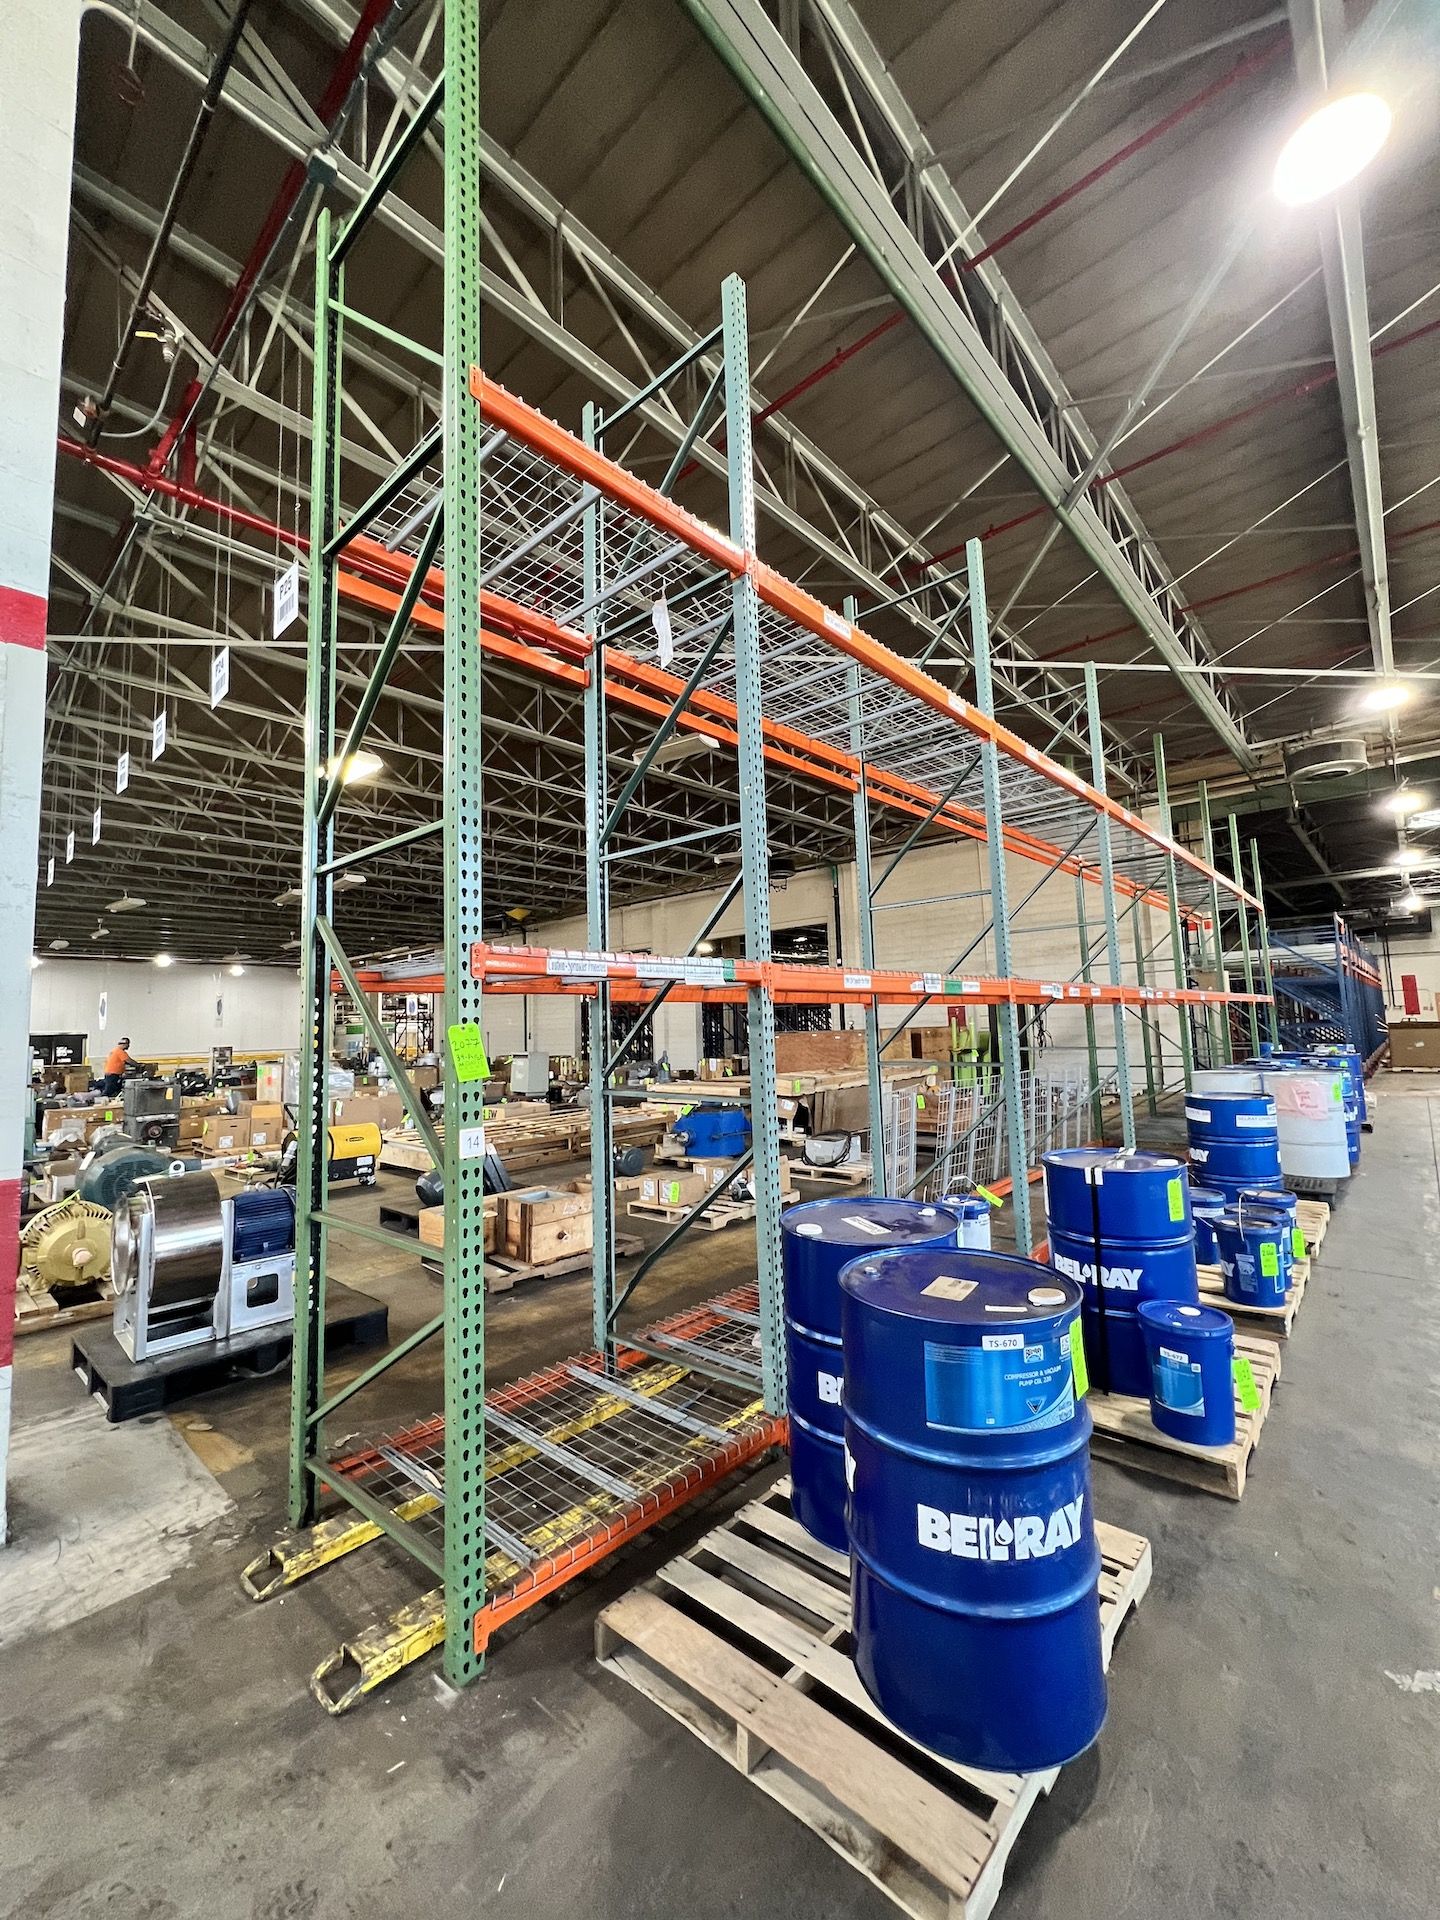 PALLET RACKING, APPROX. 39 PALLET SPACES, 7 UPRIGHTS, APPROX. 30 CROSS BEAMS, WIRE SHELVING